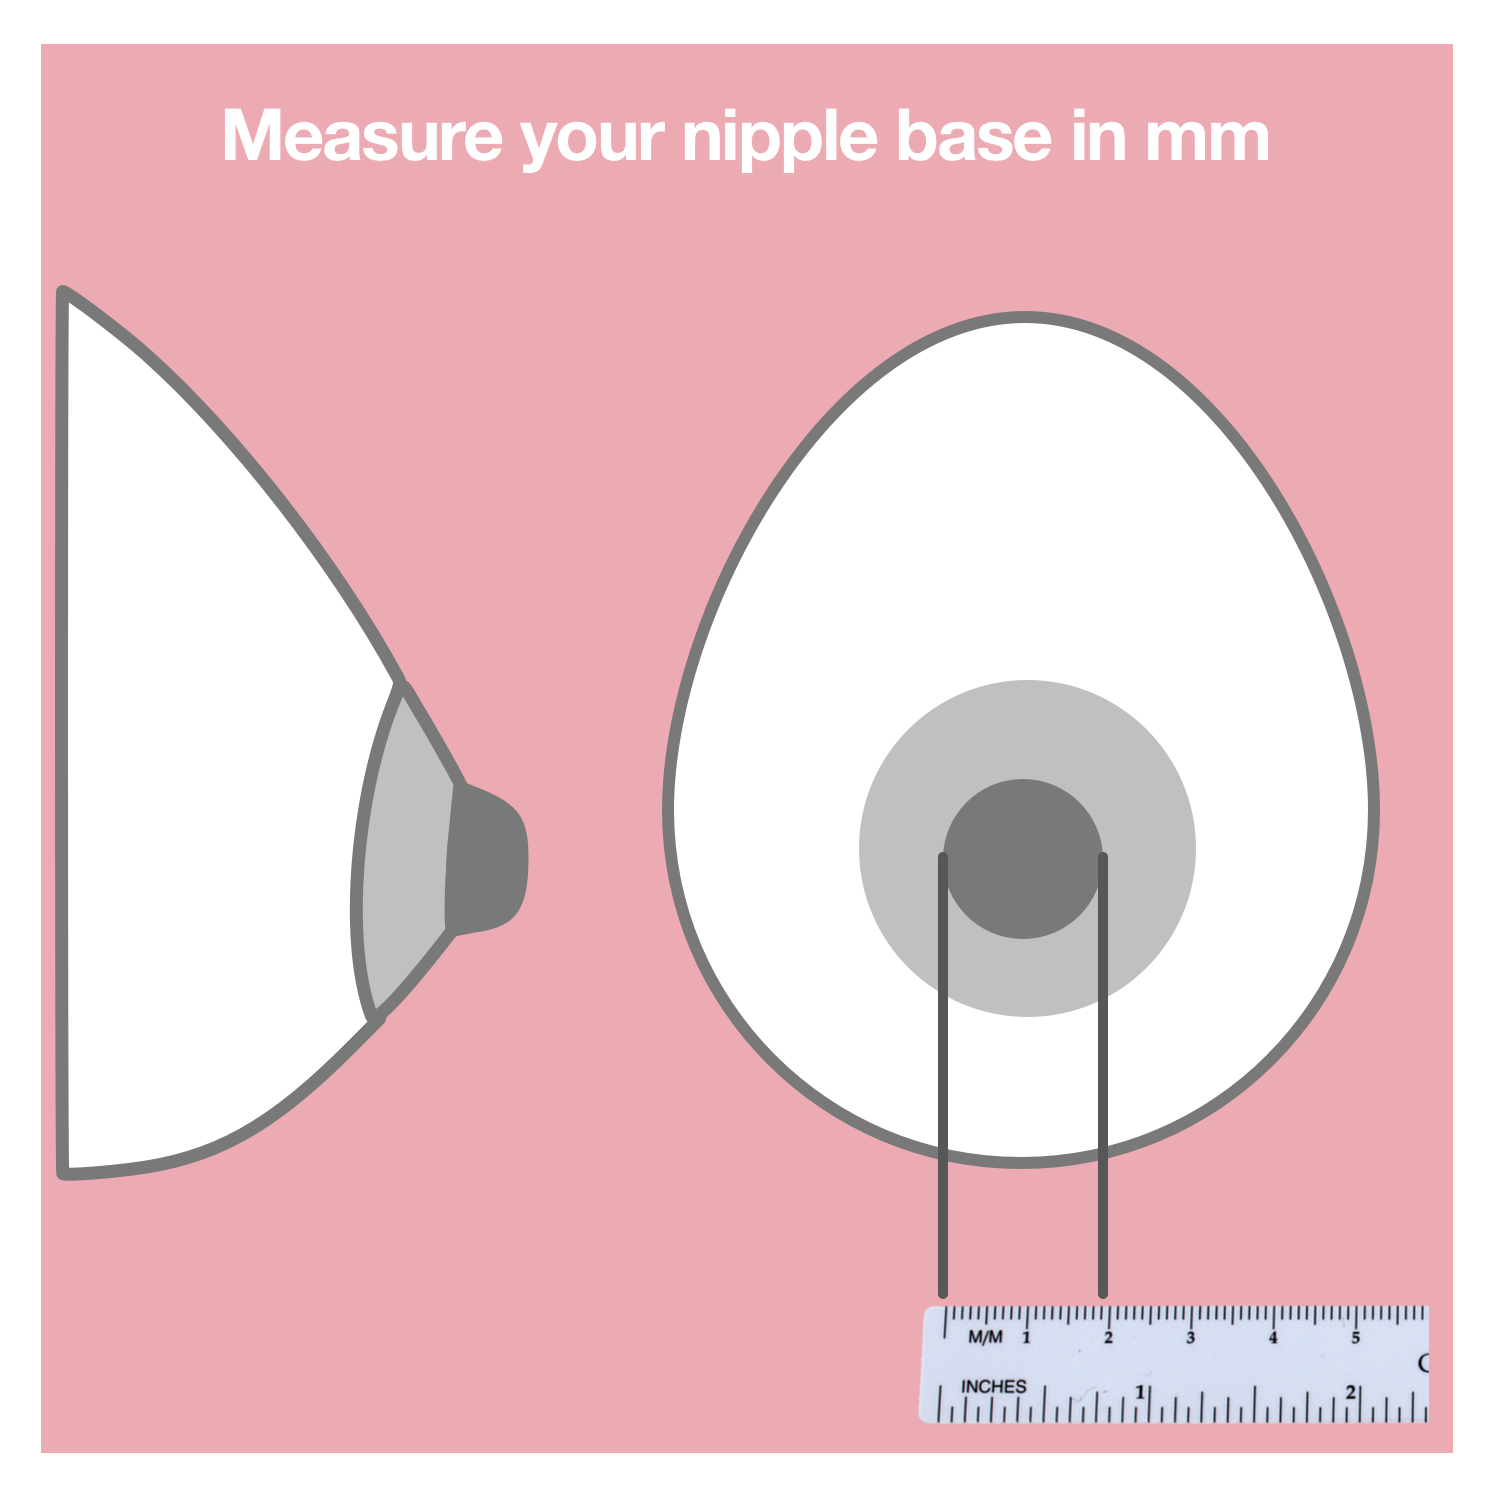 Breast Shield Sizing Guide: How to Get the Right Fit – Cimilre Breast Pumps